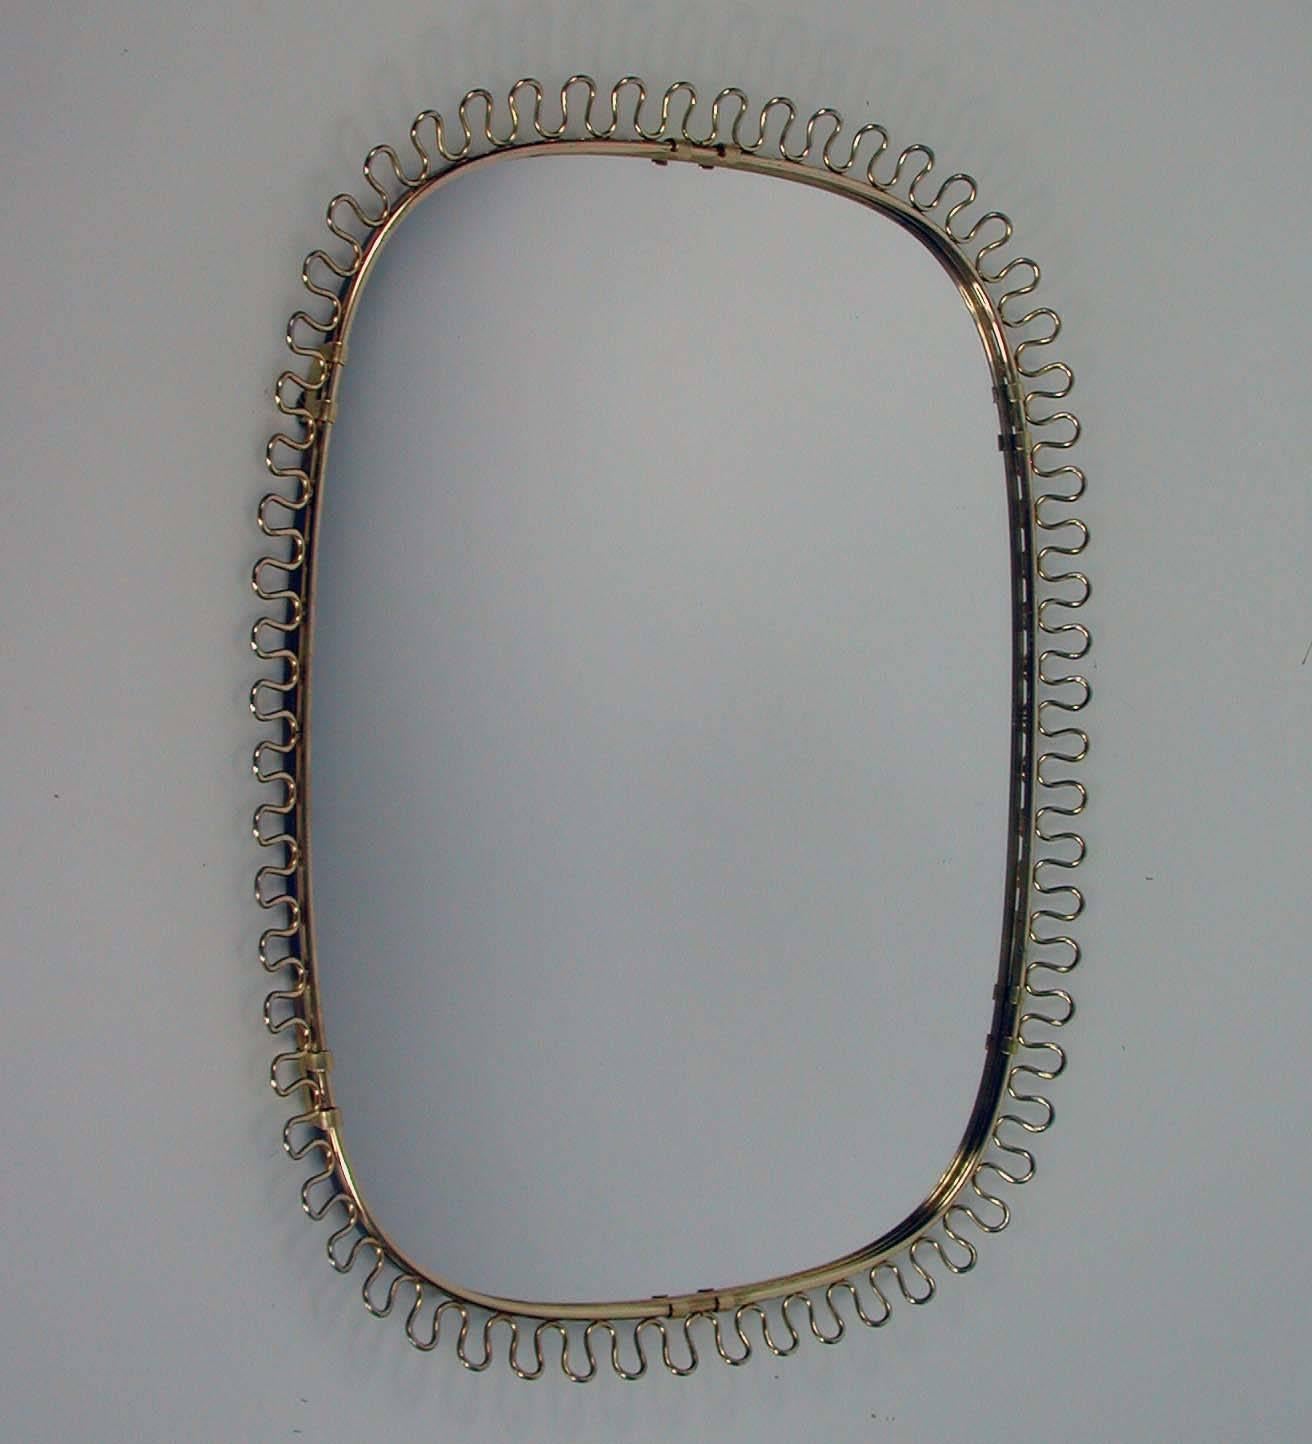 Beautiful brass loop wall mirror, by Josef Frank for Svenskt Tenn, Sweden, 1950s.
Both the mirror and the brass frame with warm original patina.